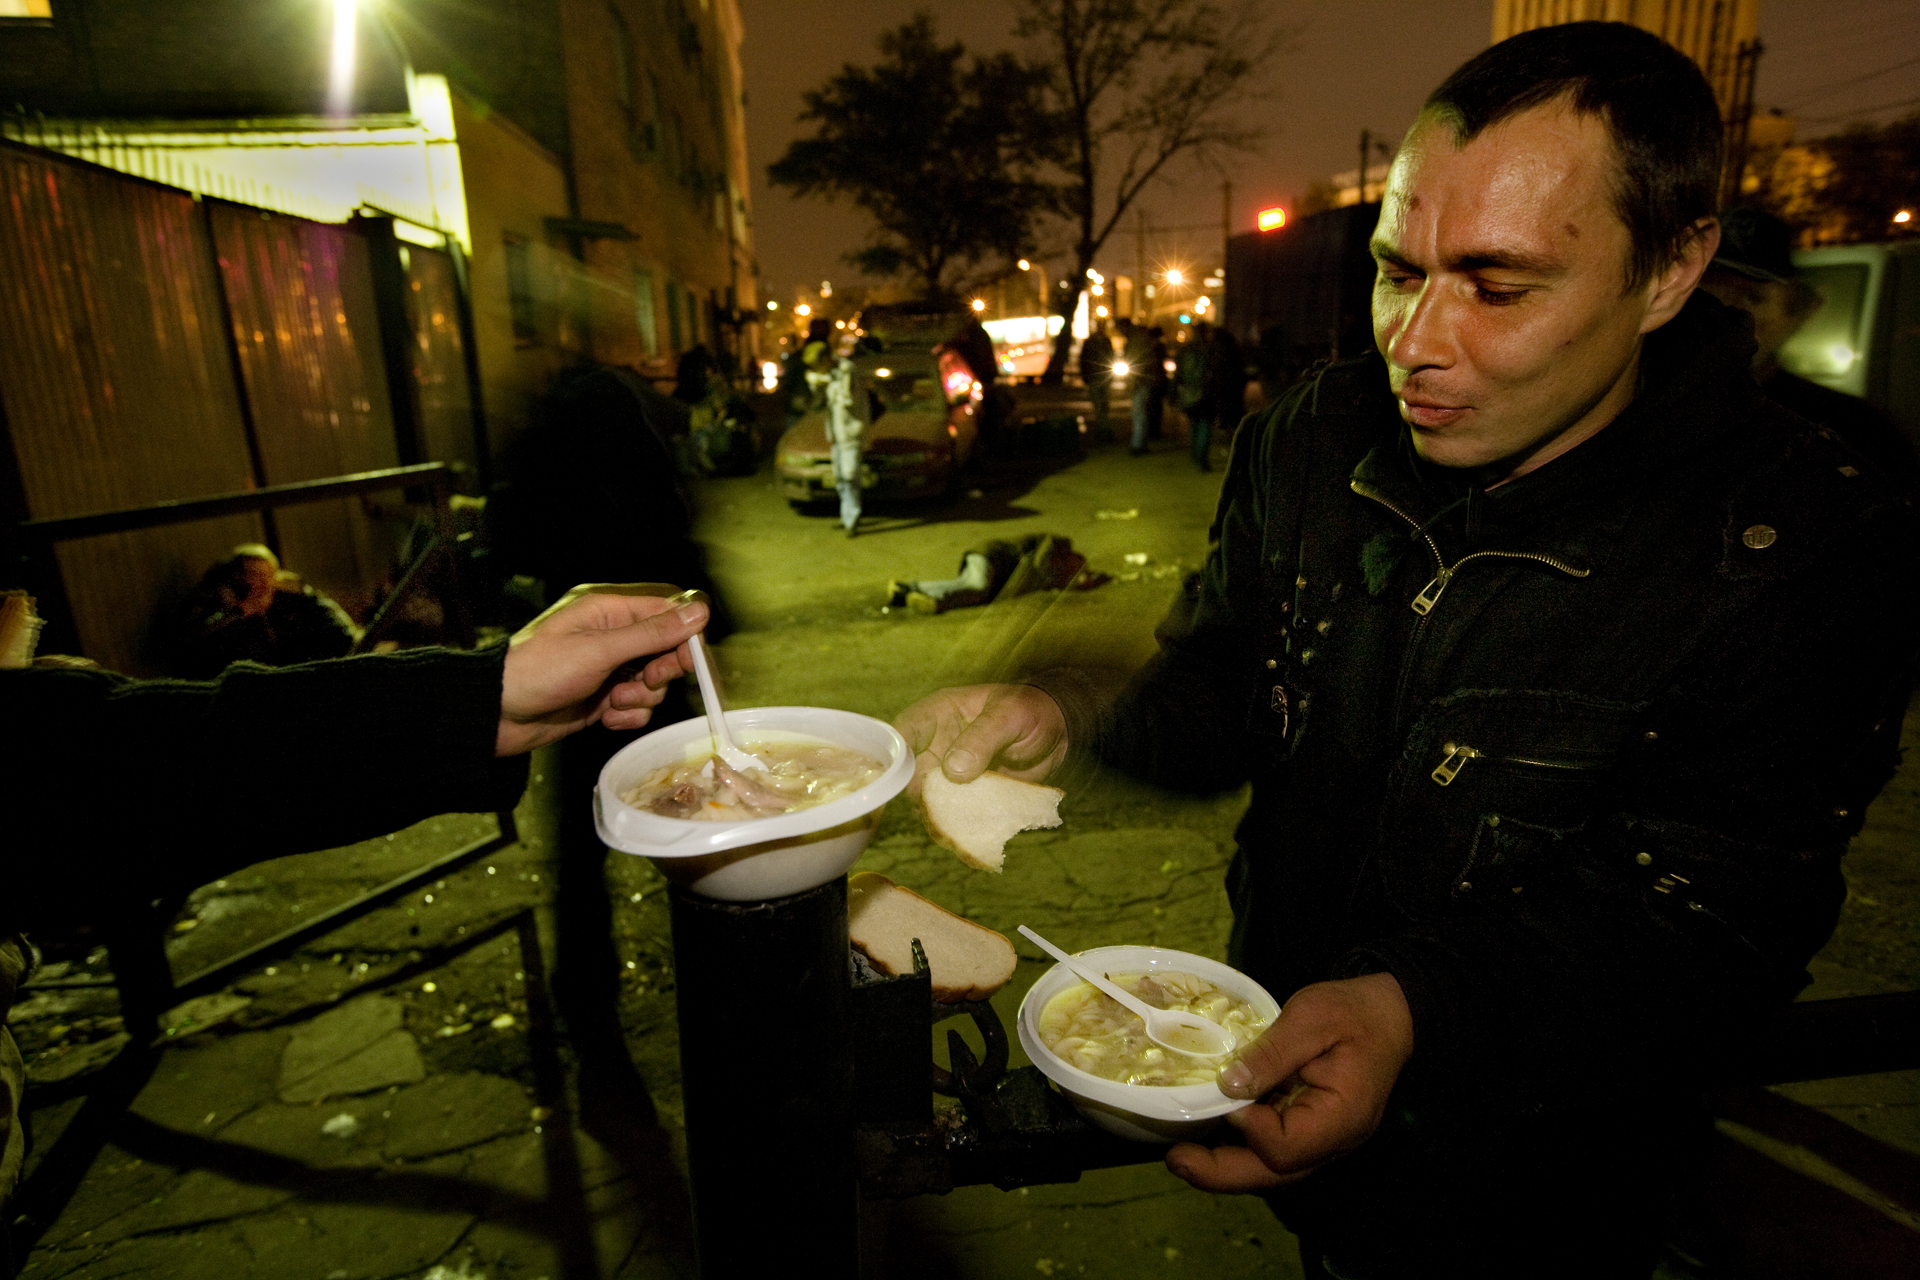  9:19 PM - A mobile food kitchen stops outside a train station to deliver warm soup and bread to the homeless. 